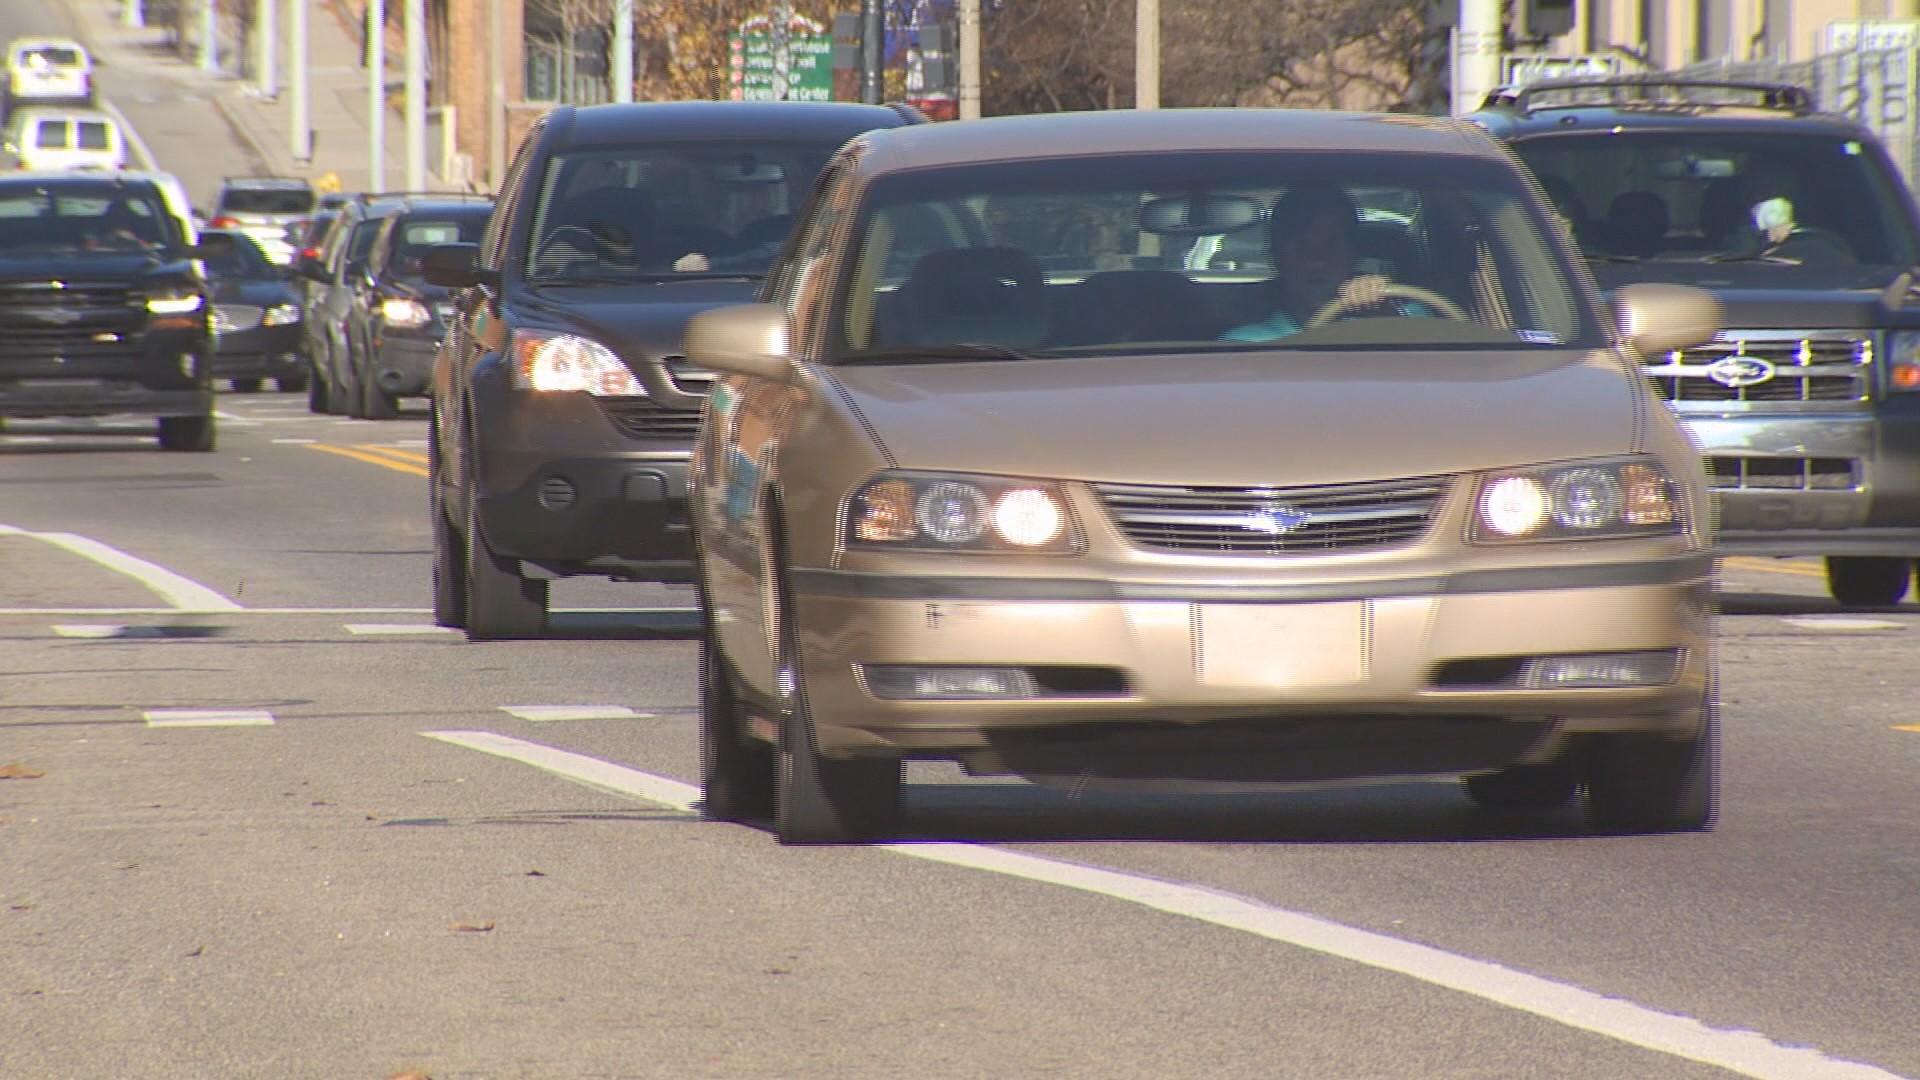 Michigan lawmakers are poised to vote on legislation to cut the state's high car insurance premiums following progress in negotiations between Republican leaders and Democratic Gov. Gretchen Whitmer.